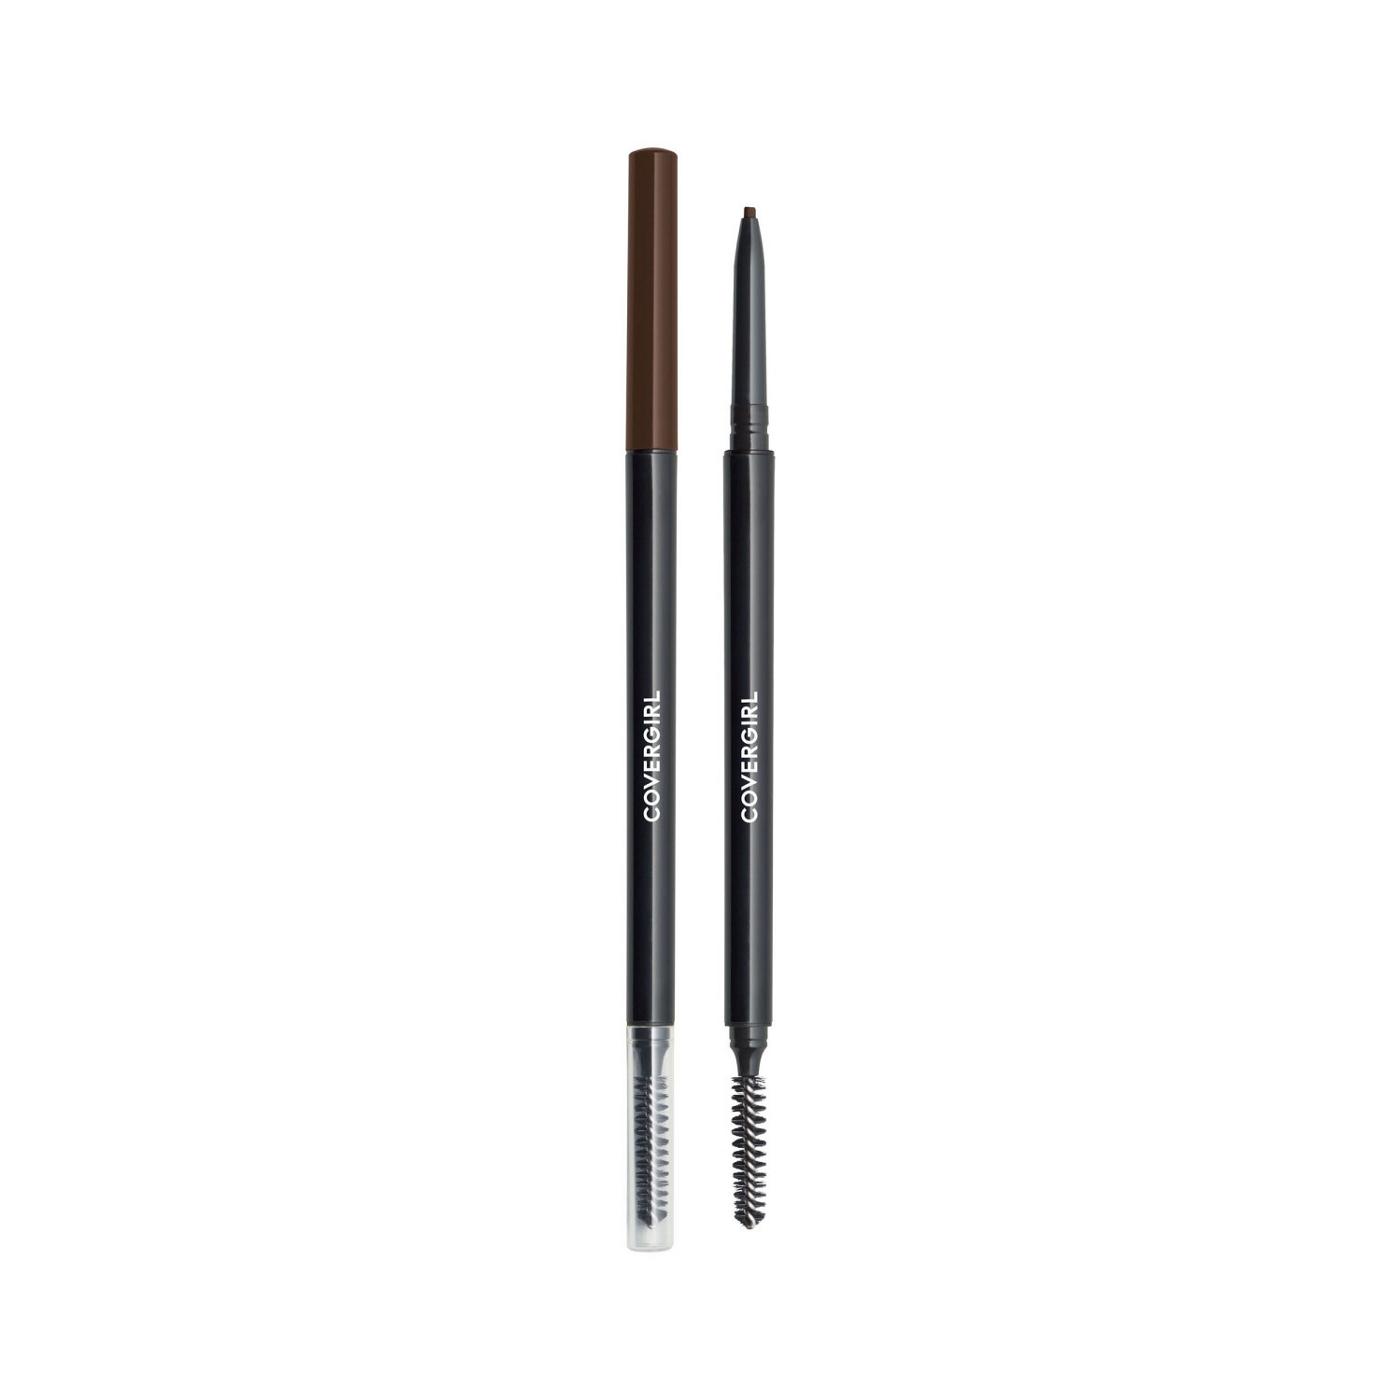 Covergirl Easy Breezy Brow Micro-Fine + Define Pencil 710 Soft Brown; image 2 of 3